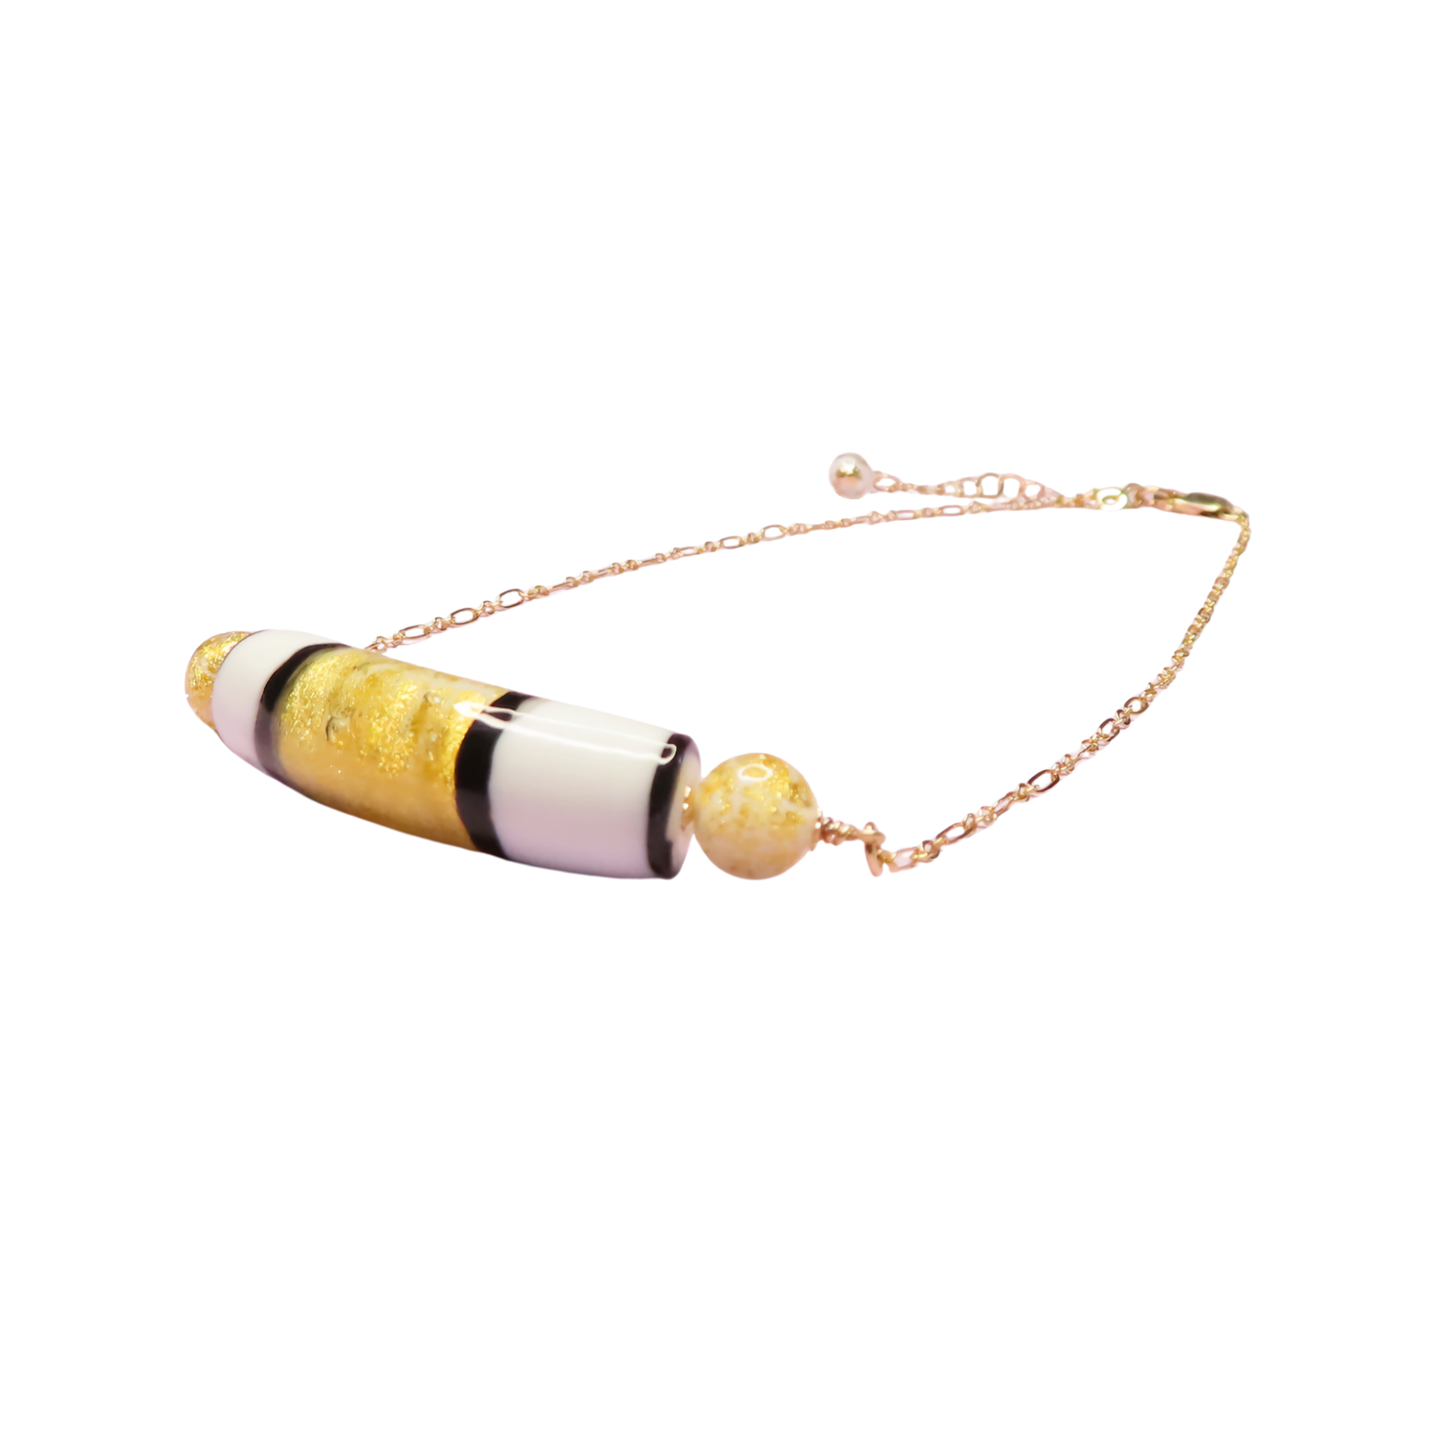 a necklace with a yellow gold and black bead